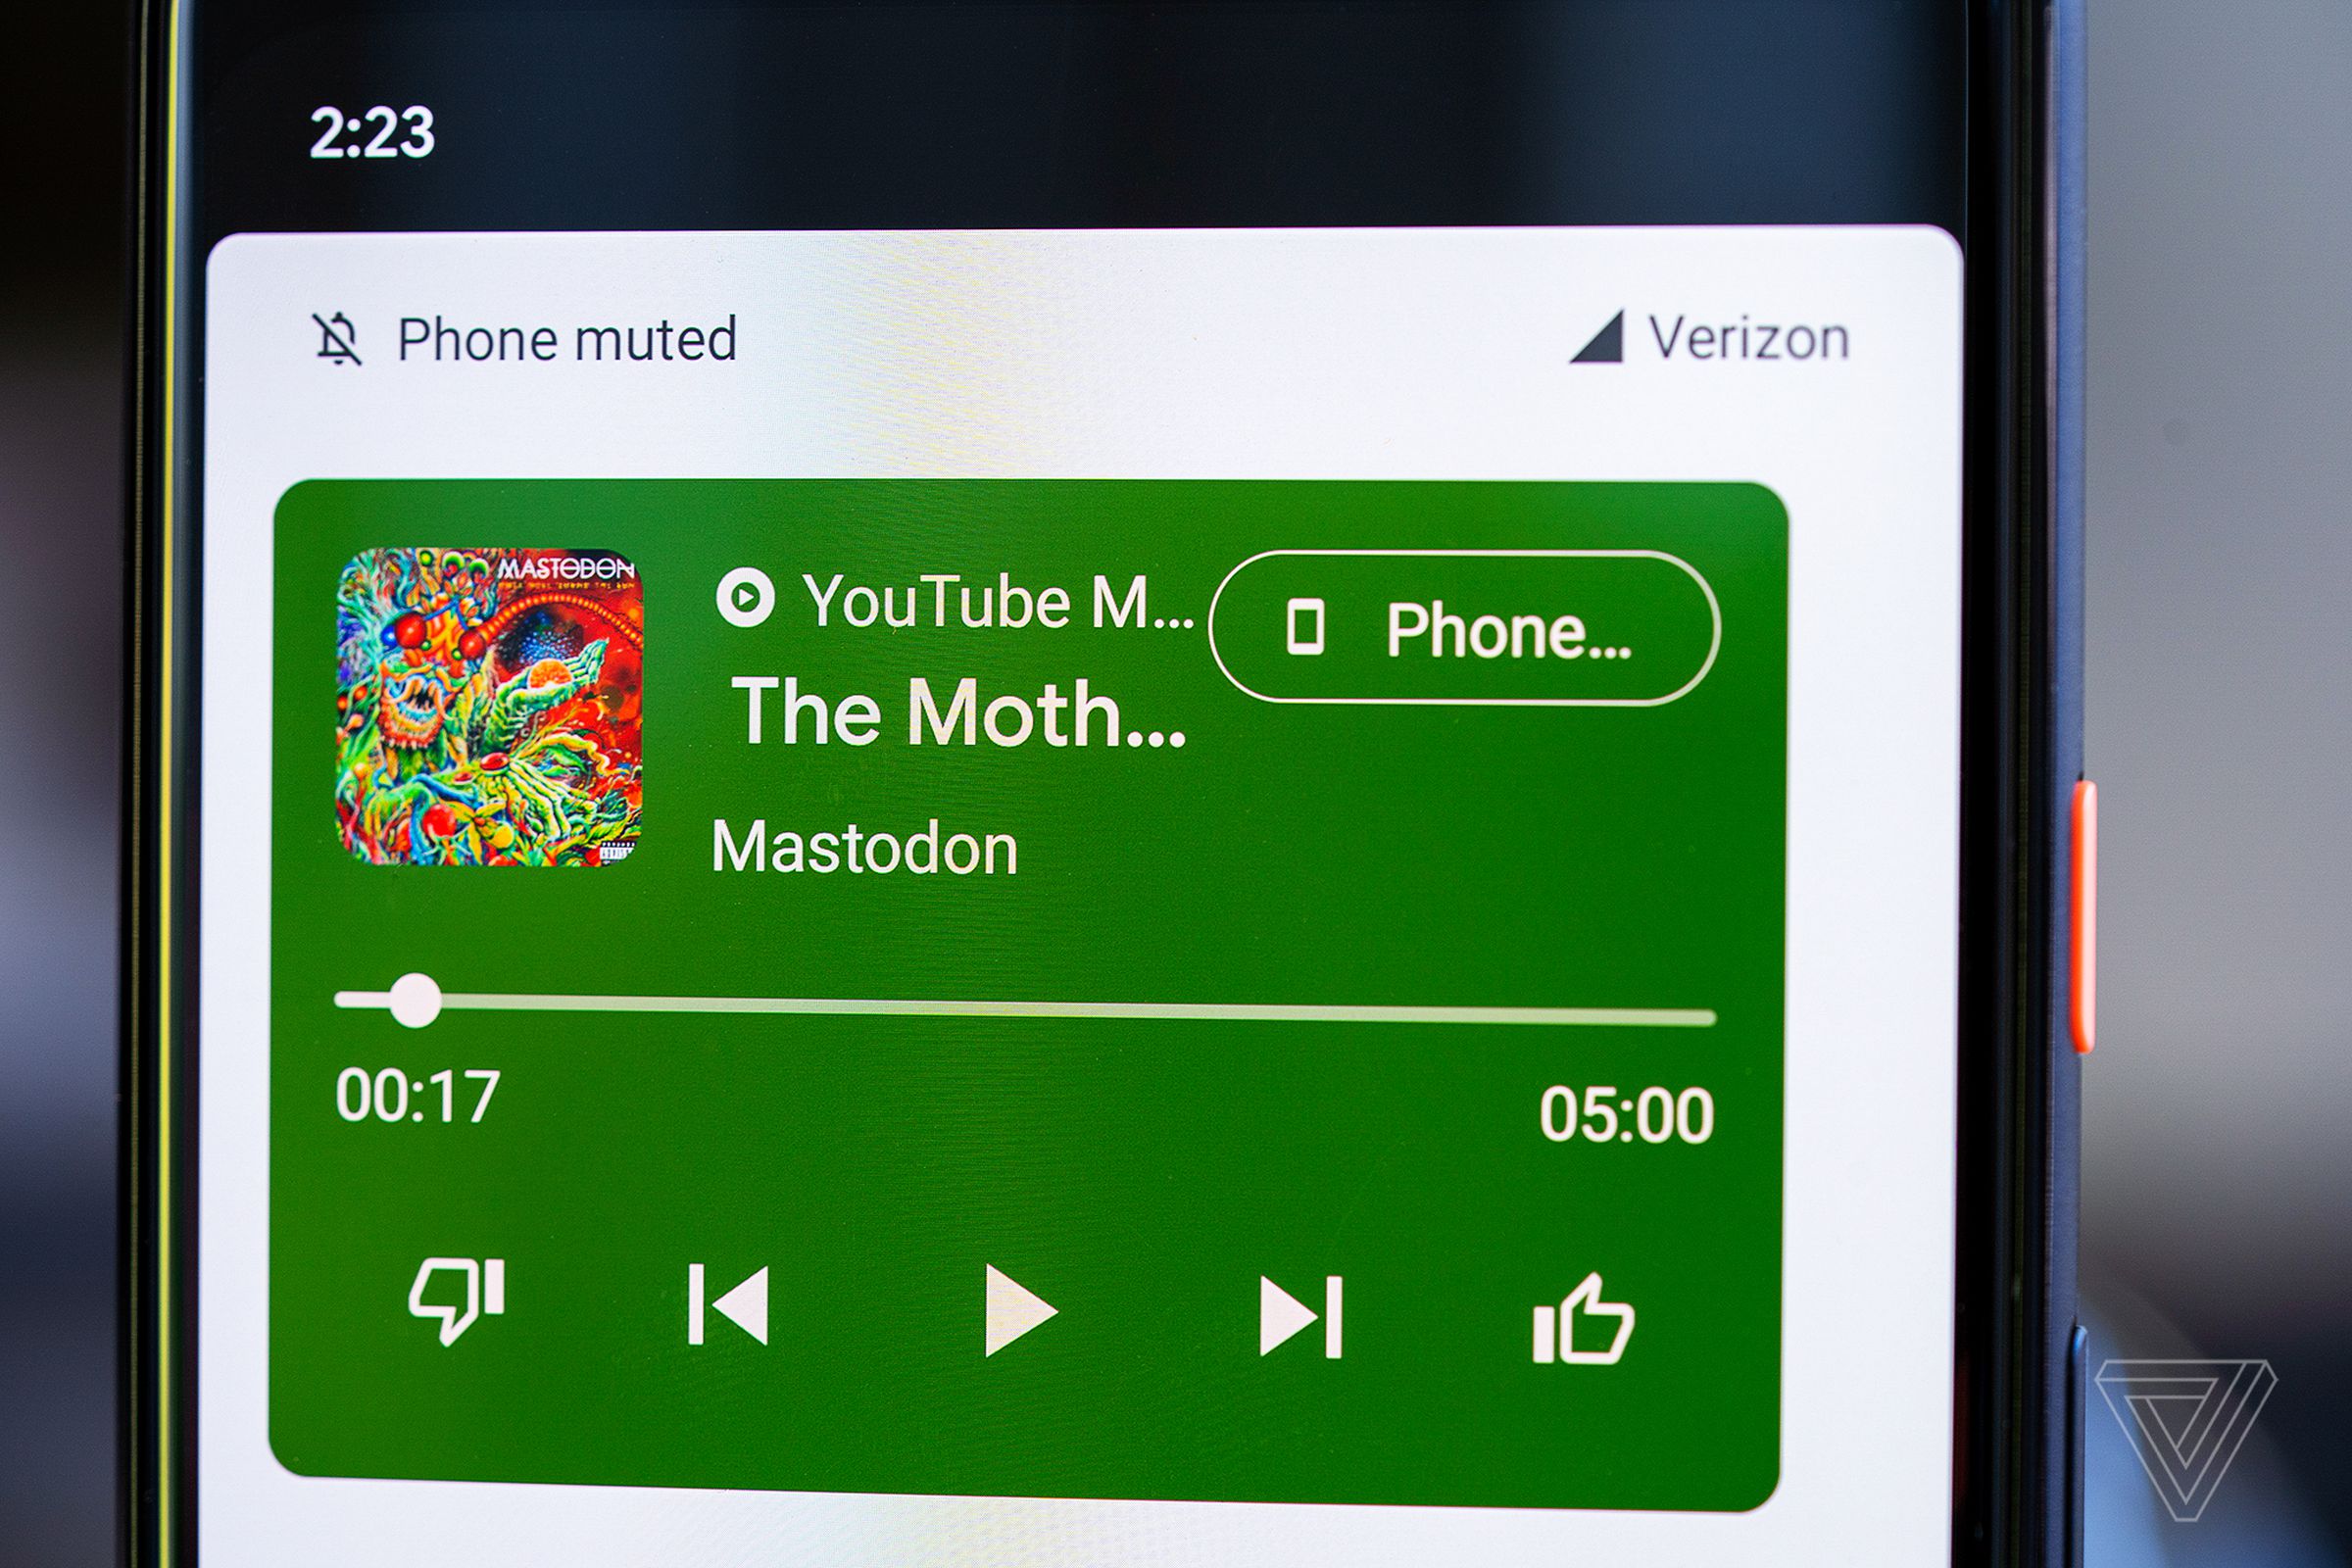 Android 11 puts media controls above Quick Settings, and lets you choose your output